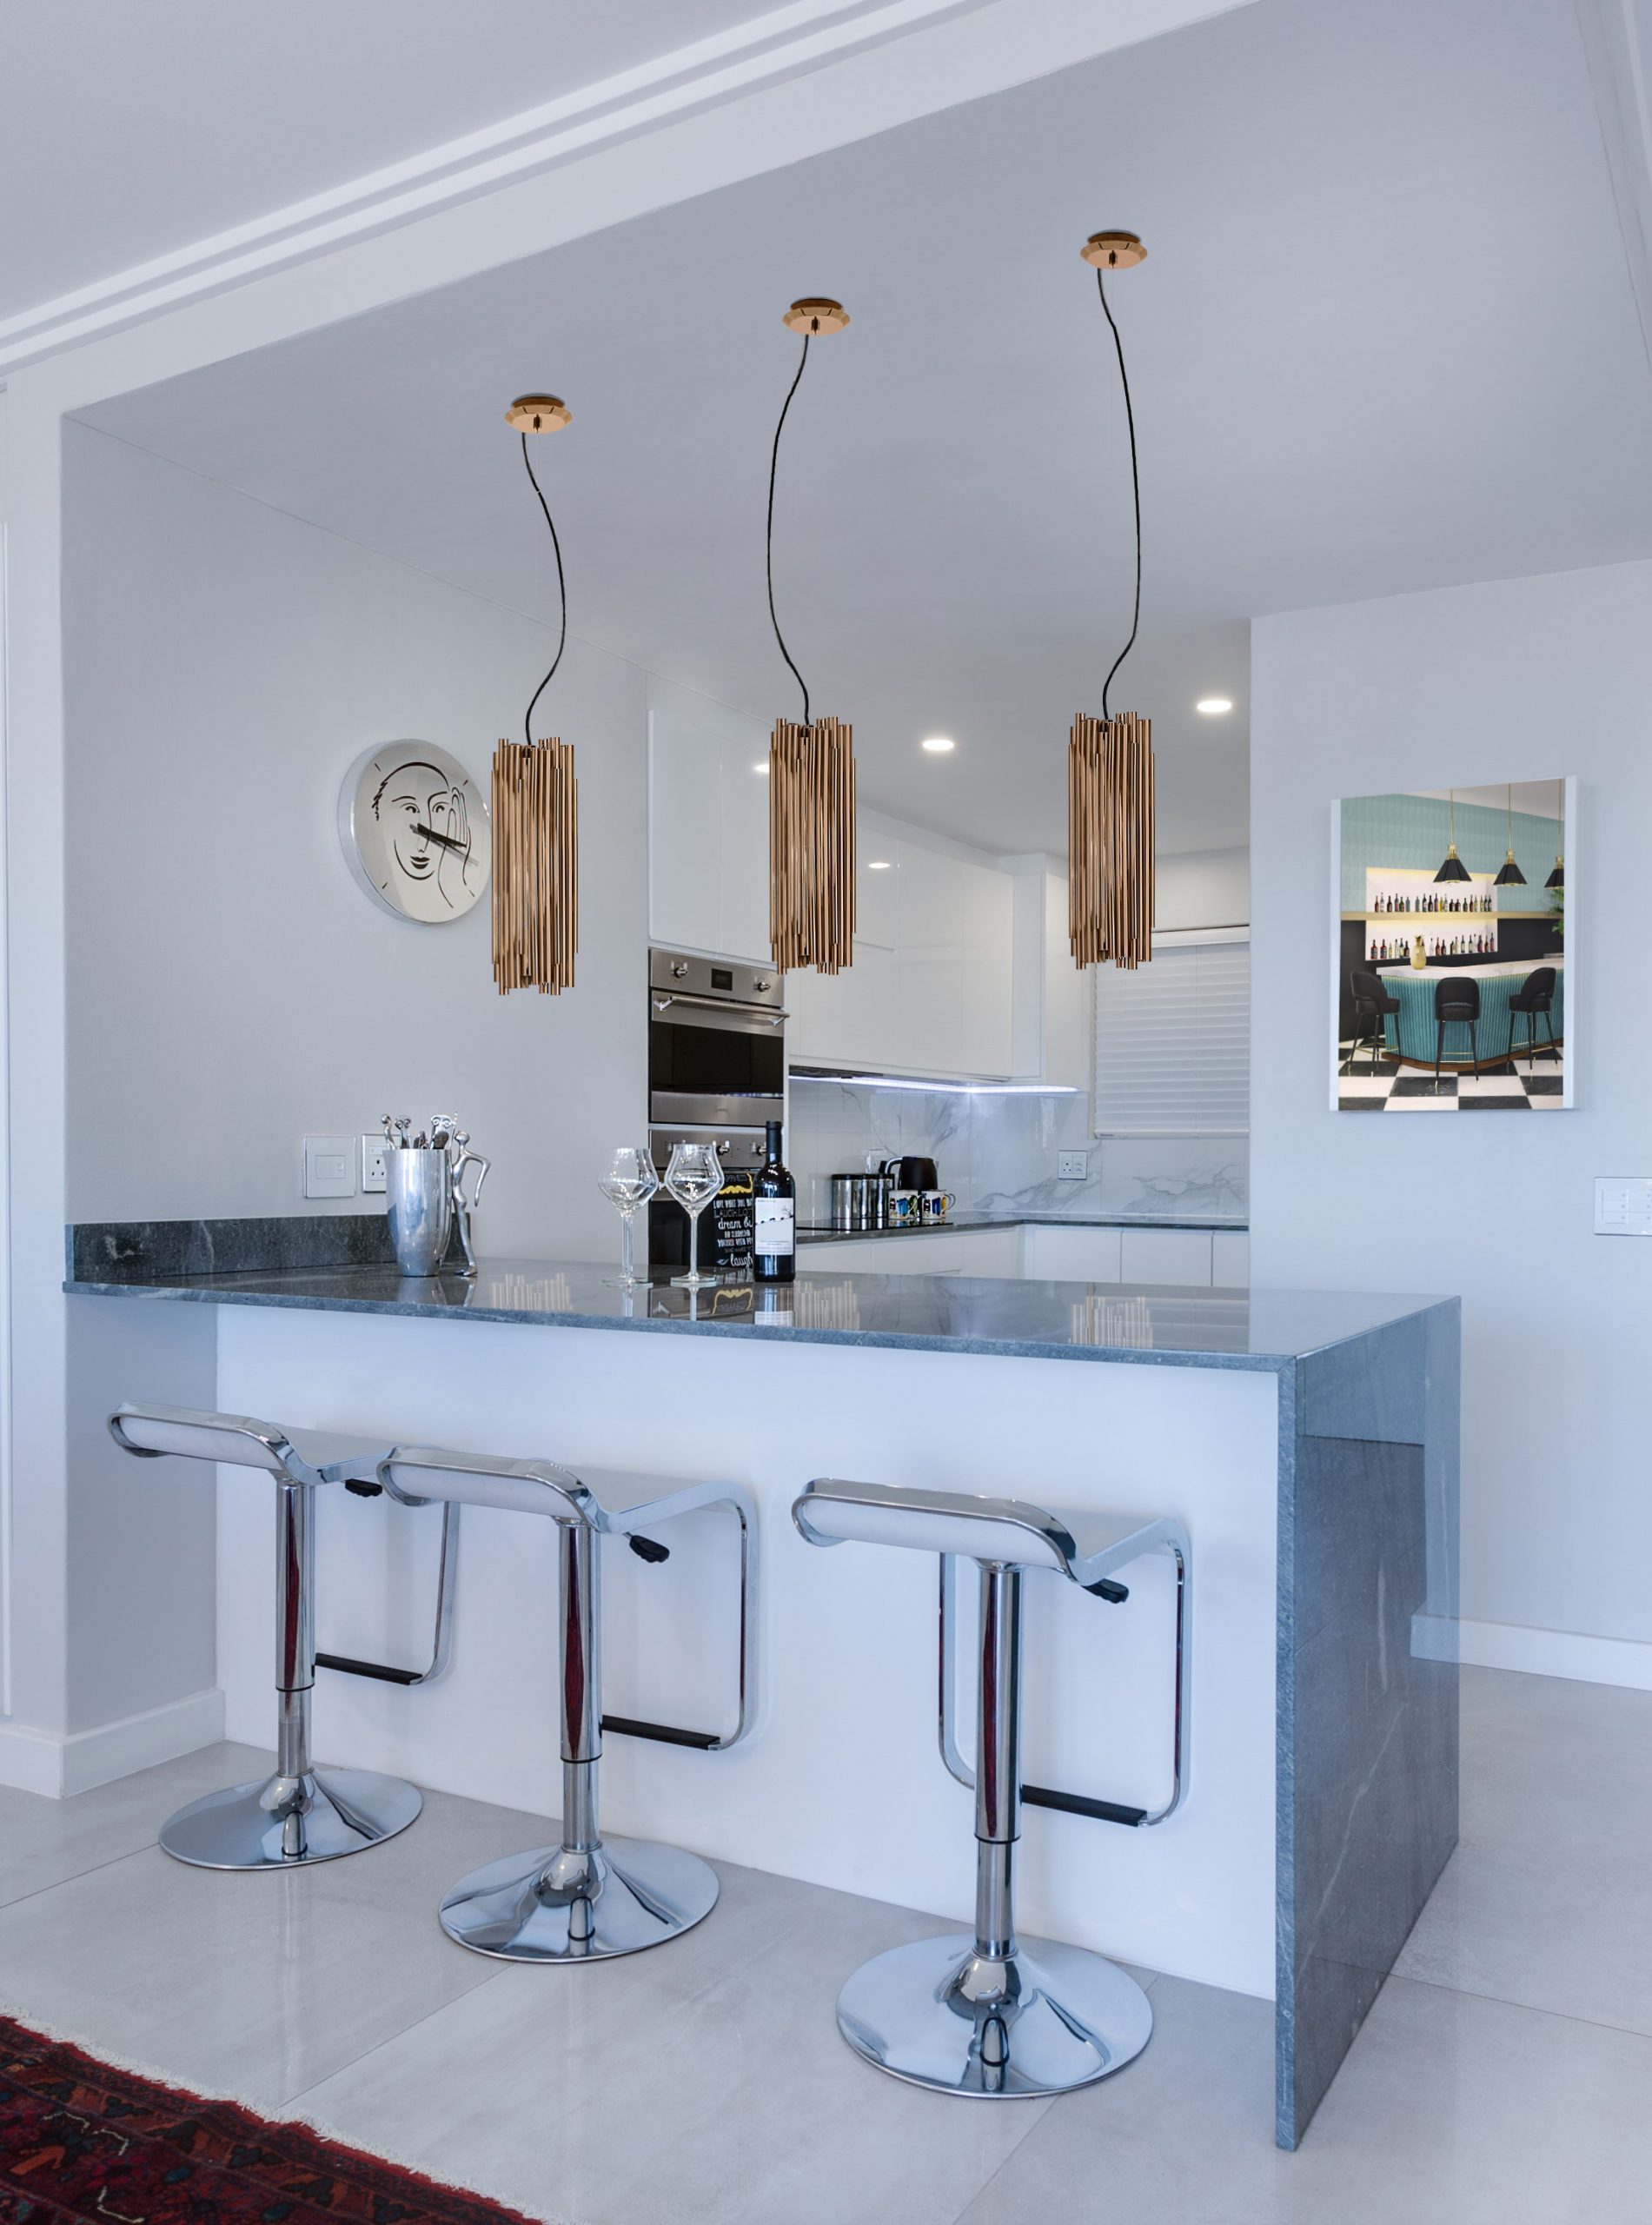 6 Lighting Ideas That Will Spice Your Kitchen Décor!